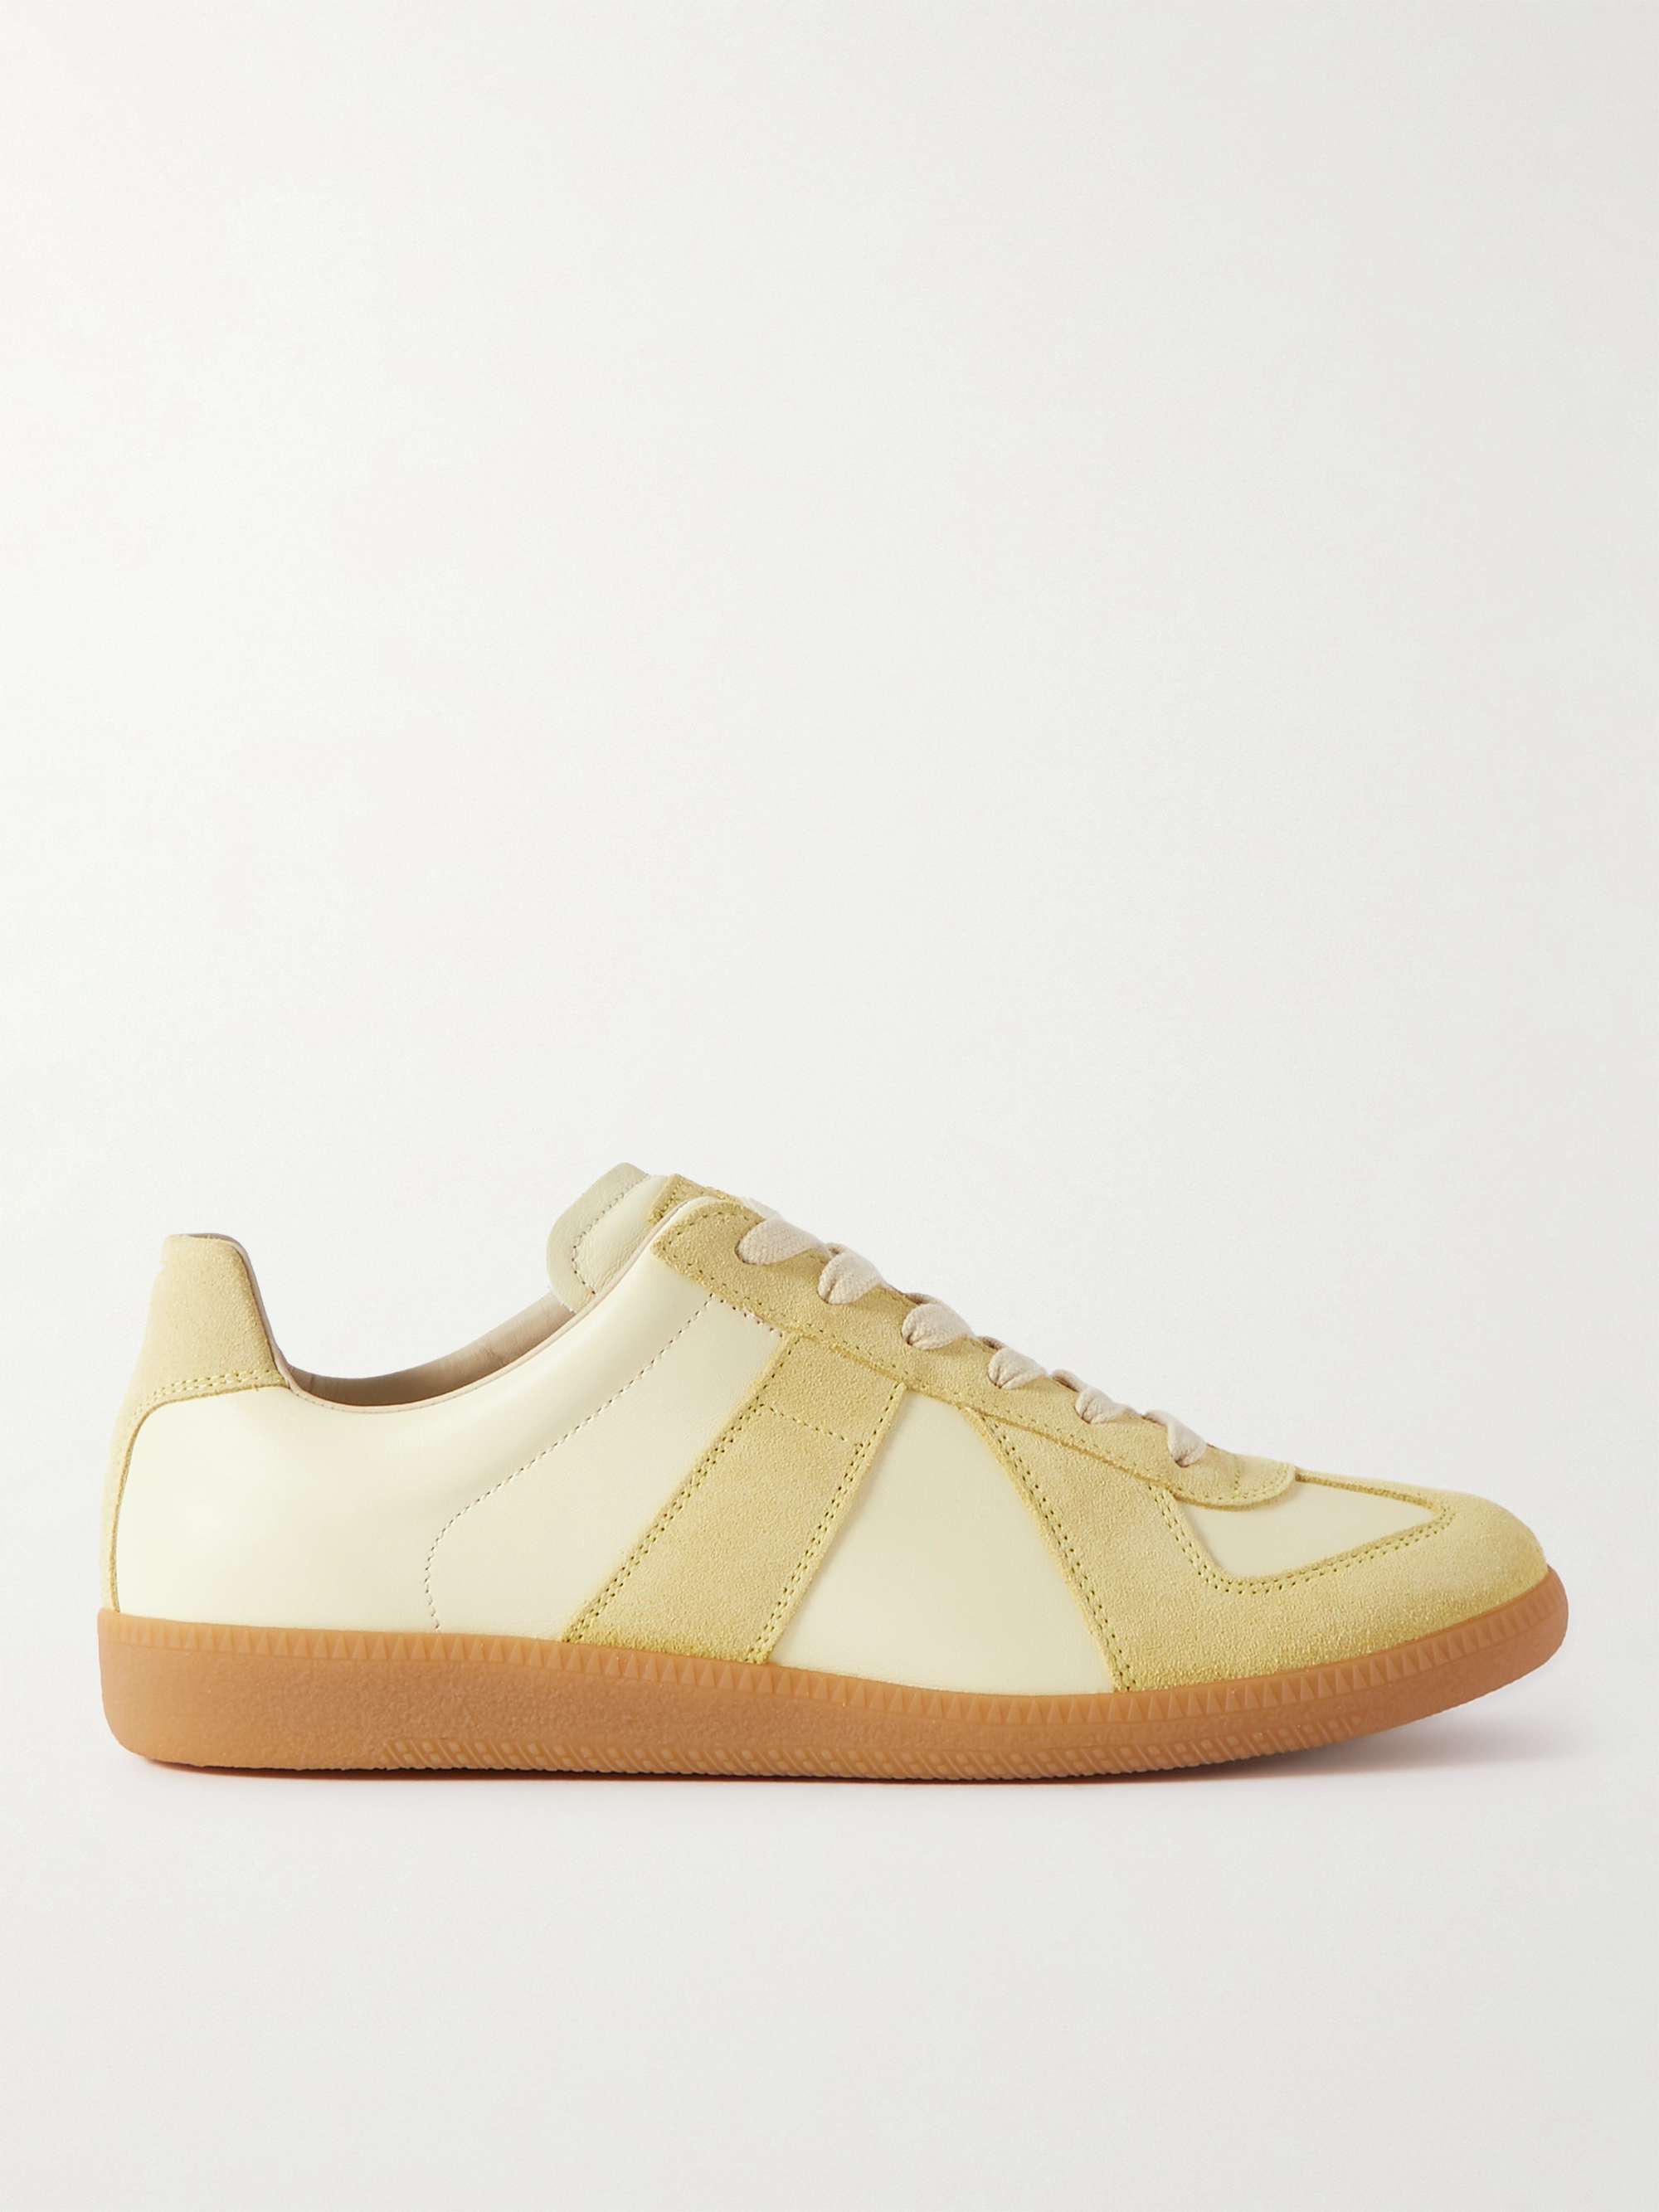 MAISON MARGIELA Replica Leather and Suede Sneakers for Men | MR PORTER